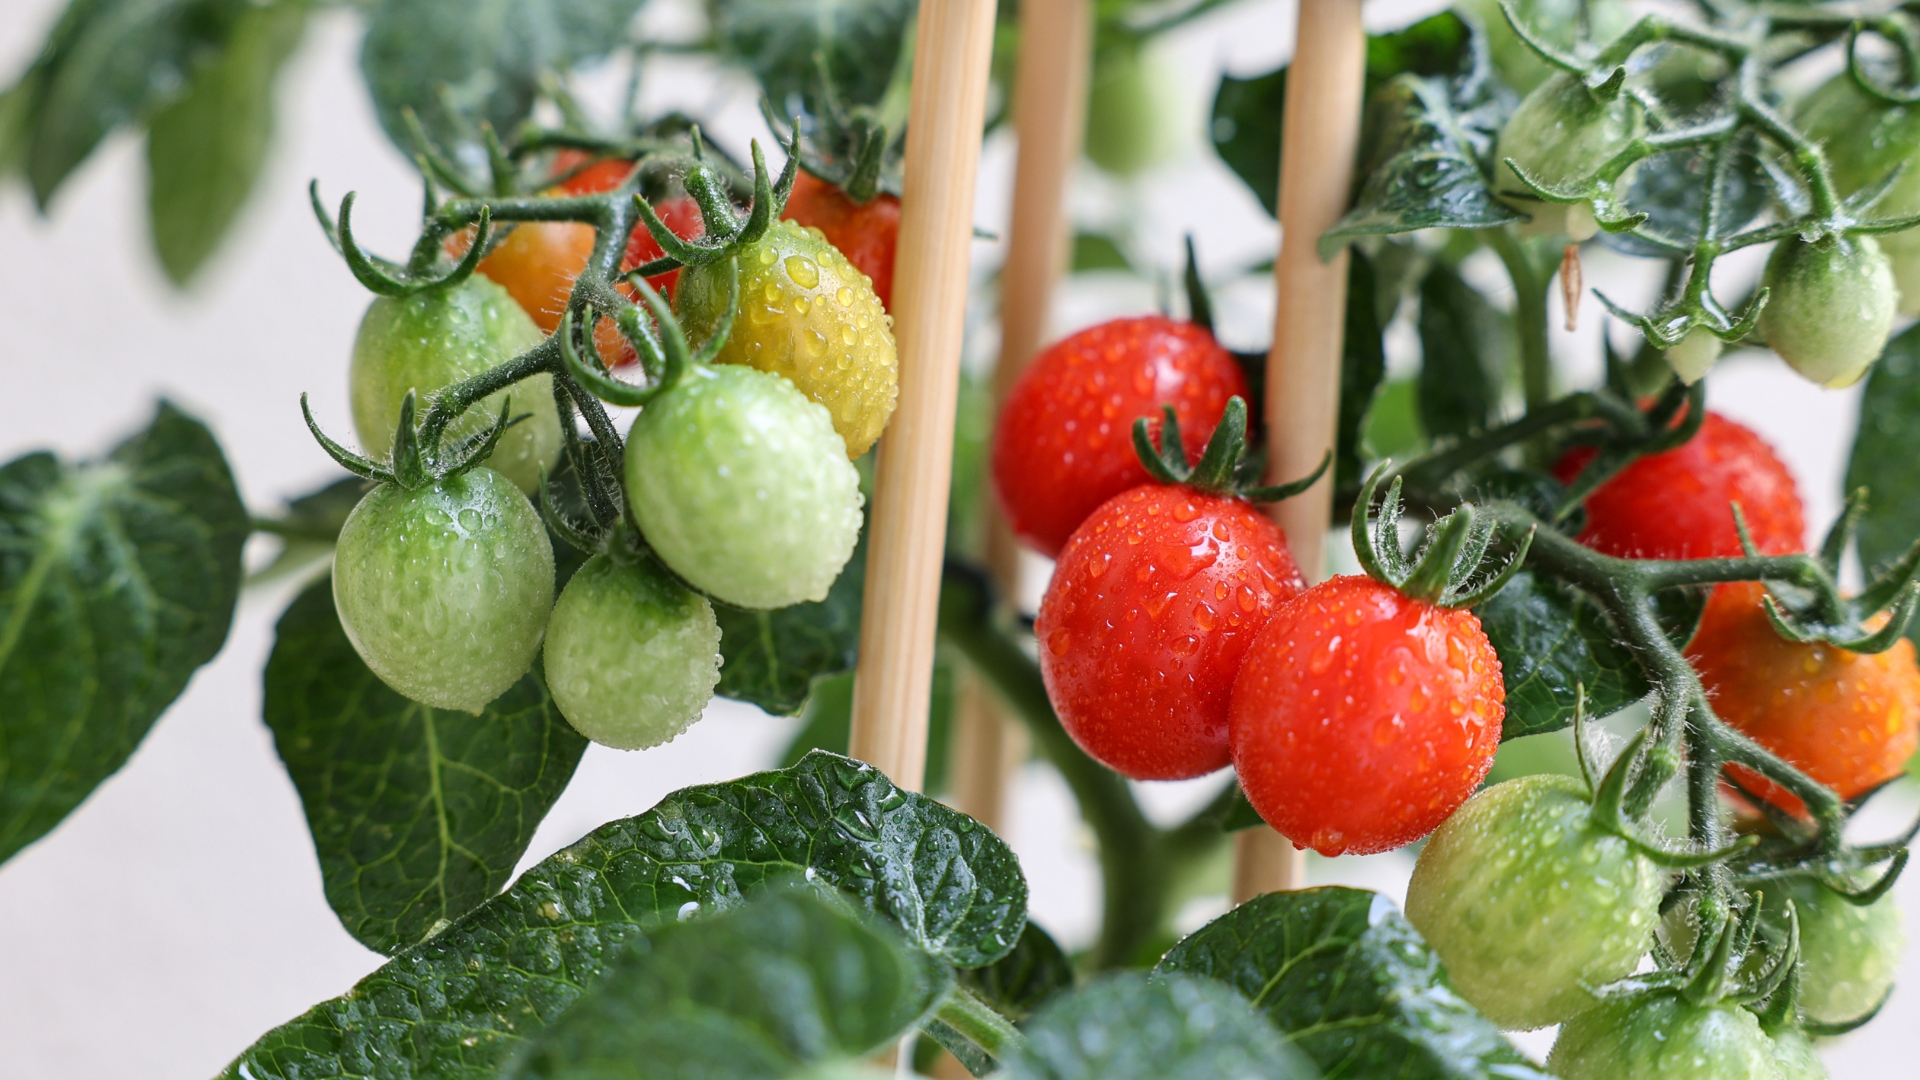 How To Grow Tomatoes During The Winter Season